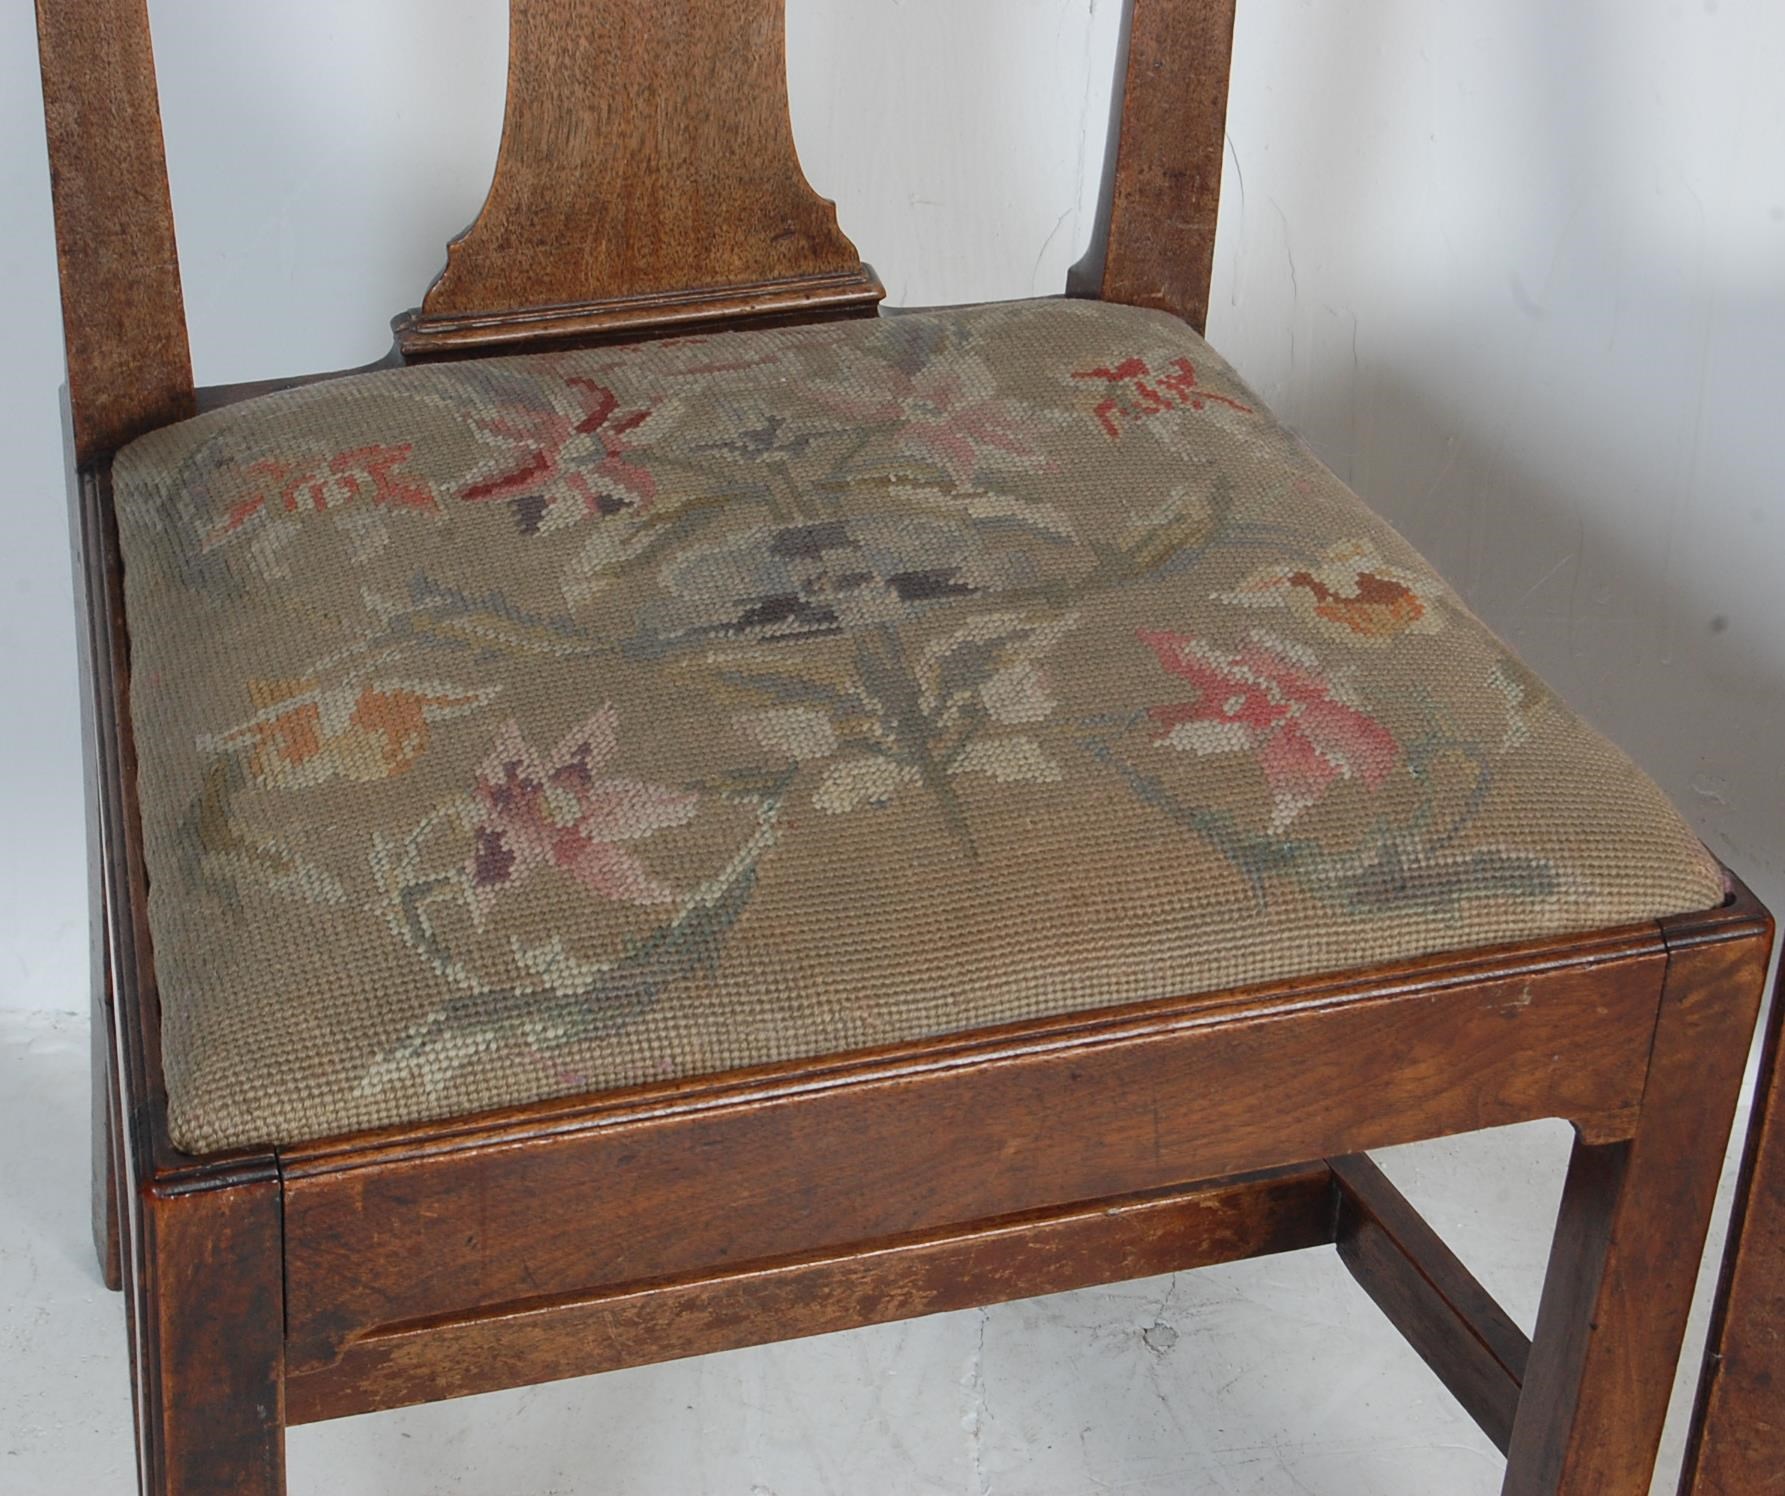 PAIR 18TH CENTURY QUEEN ANNE OAK BEDROOM CHAIRS - Image 3 of 8